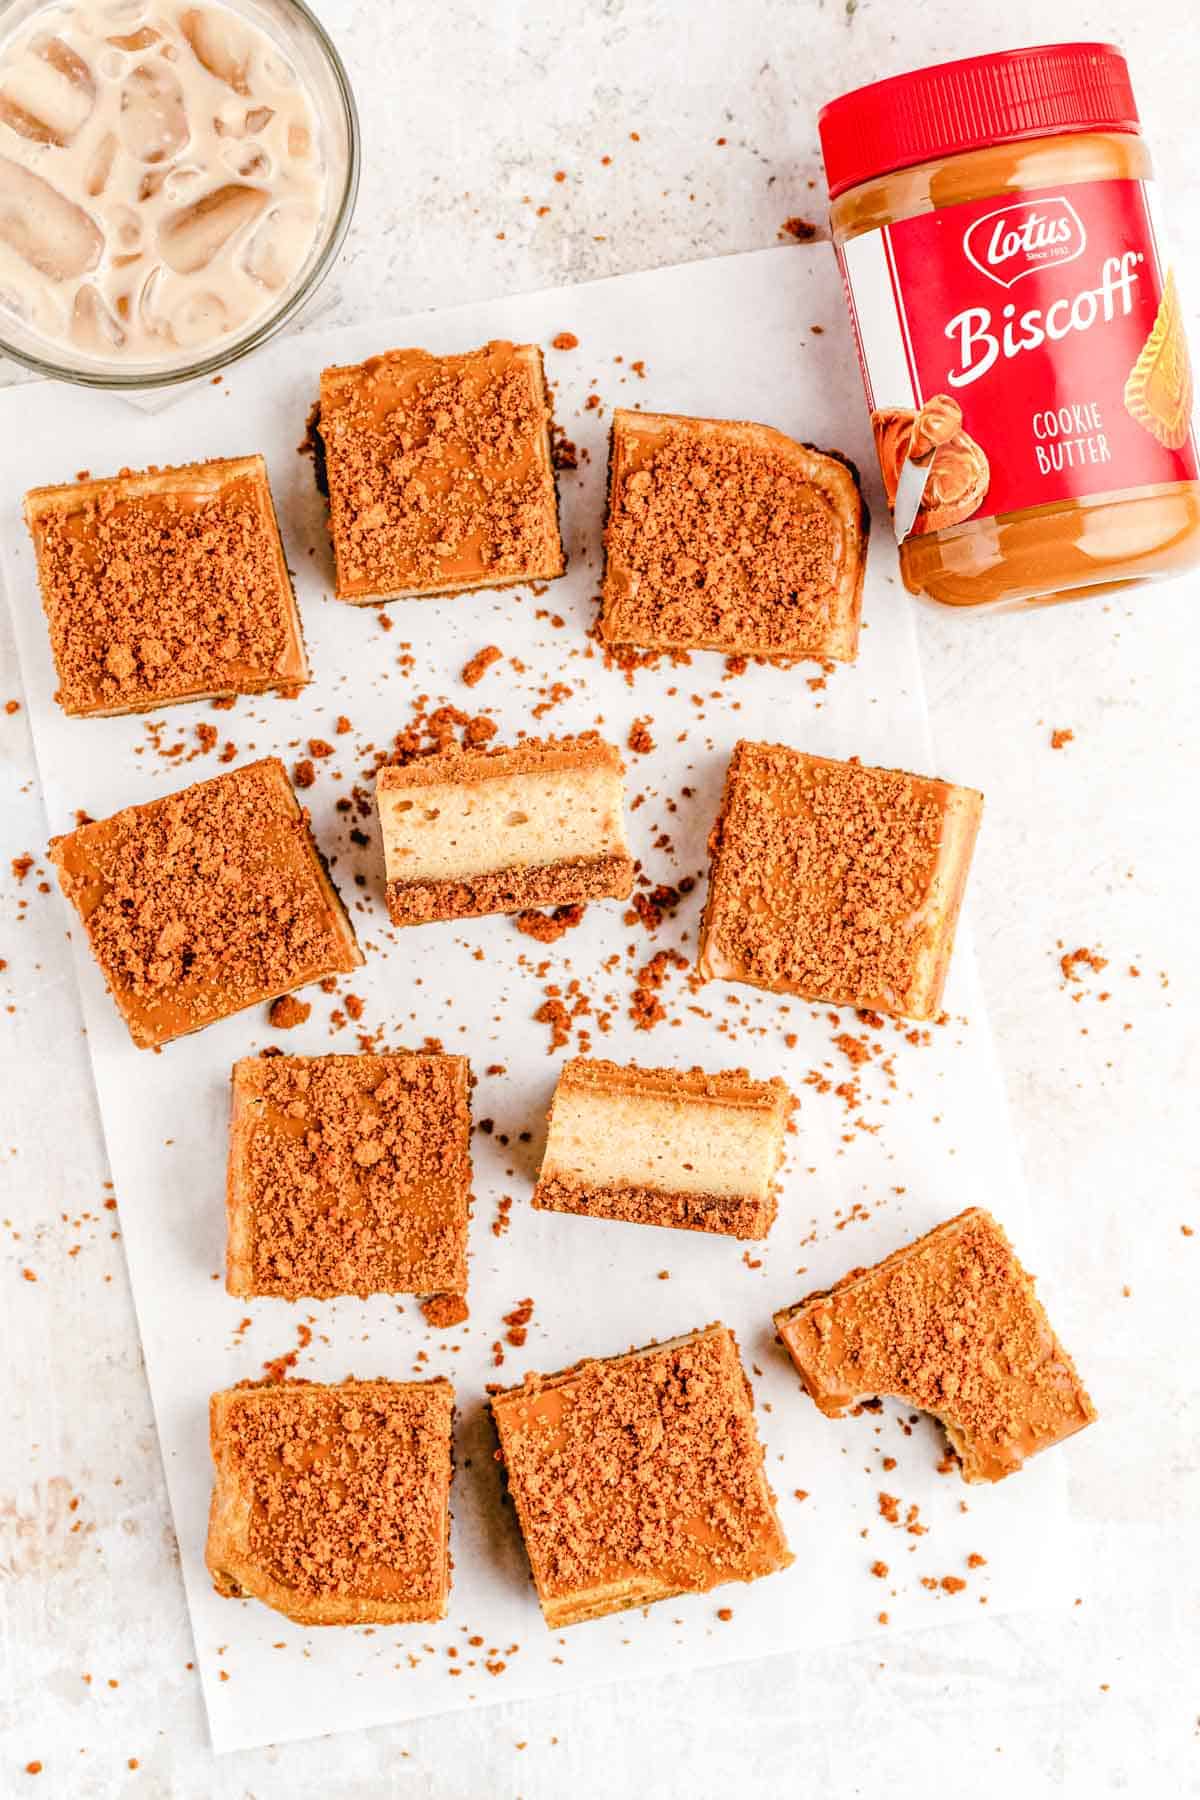 Slice Biscoff Cookie Butter Cheesecake Bars on parchment with a jar of Biscoff cookie butter and a glass of iced coffee in the background.